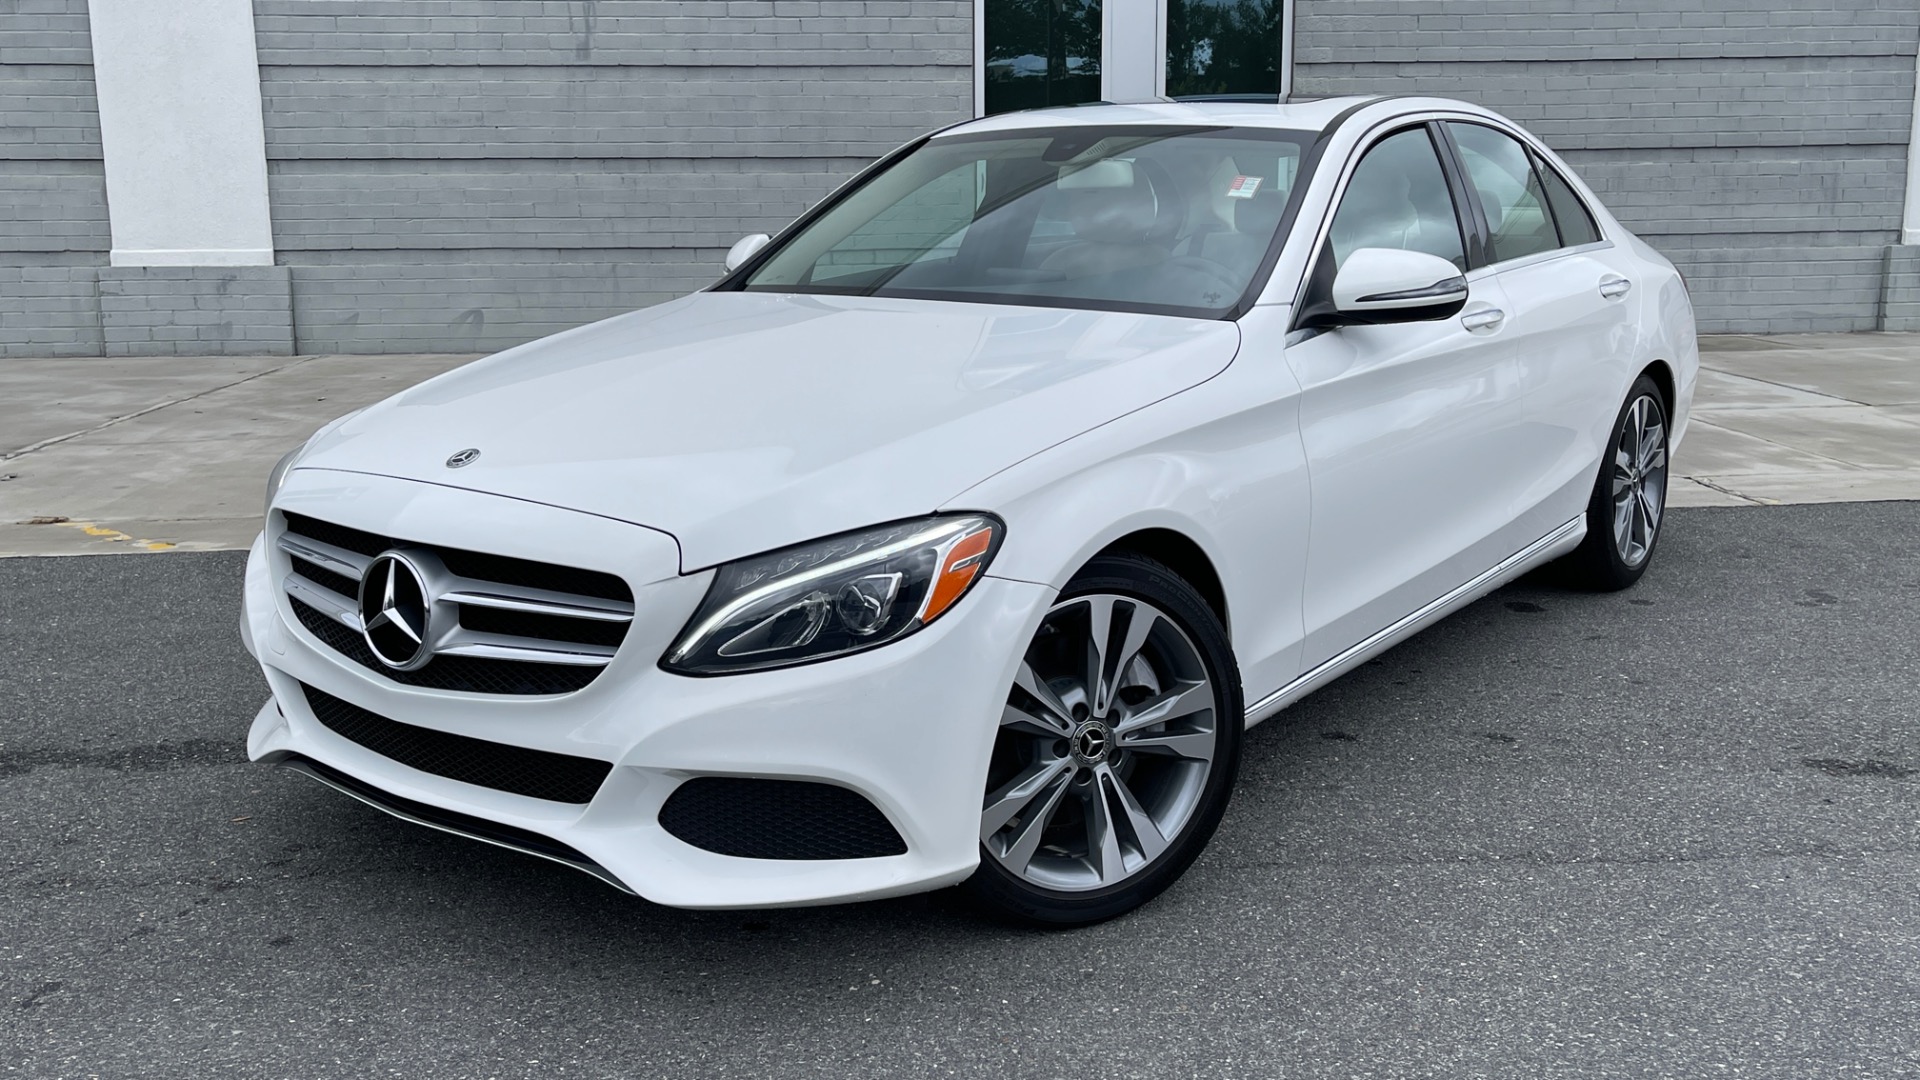 Used 2018 Mercedes-Benz C-Class C 300 / PREMIUM PACKAGE / 18IN WHEELS / HEATED FRONT SEATS / LED HEADLIGHTS for sale Sold at Formula Imports in Charlotte NC 28227 1